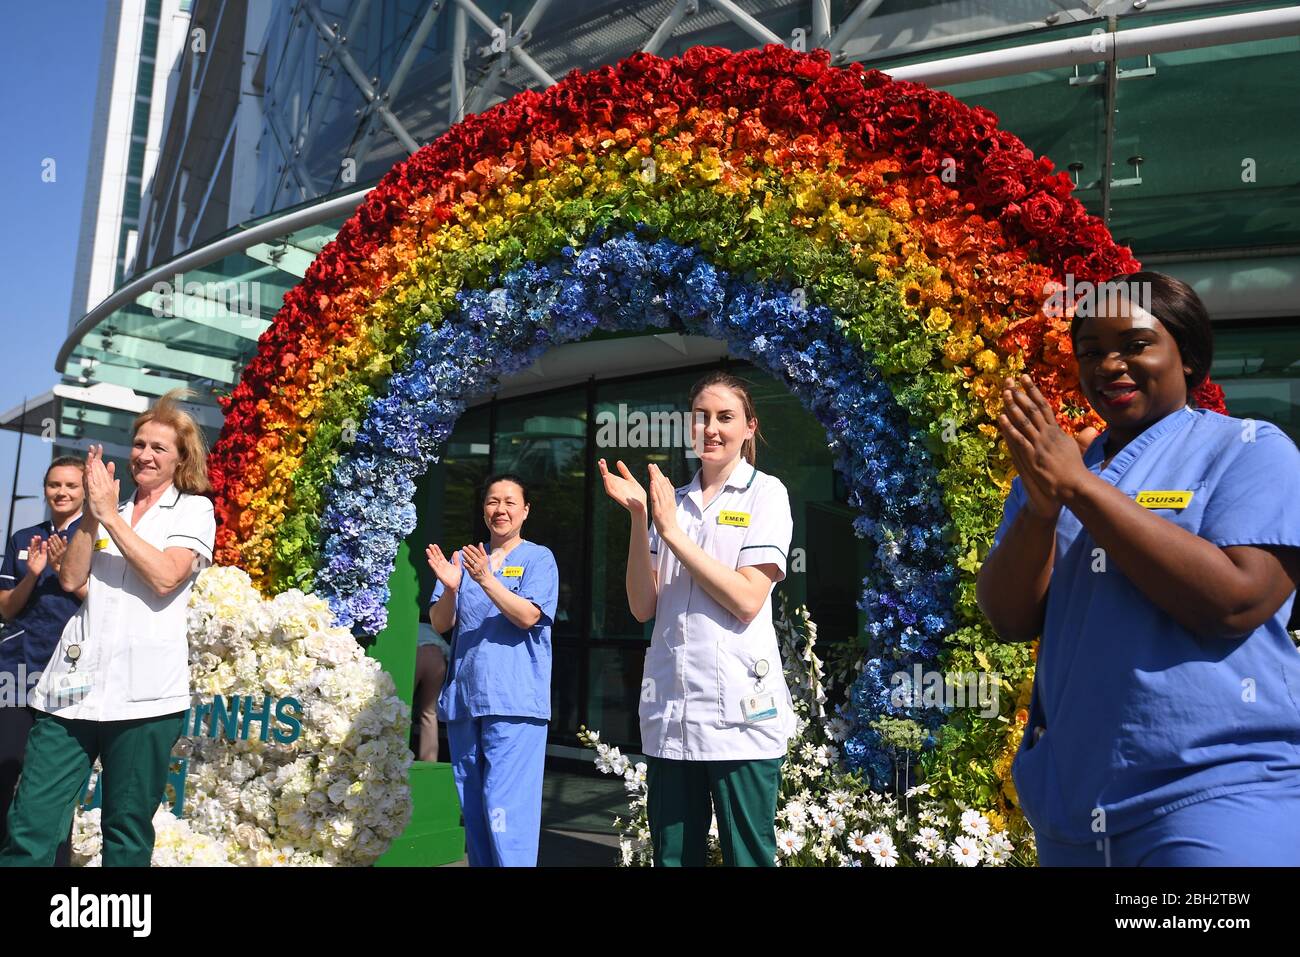 Nurses and occupational therapists help to unveil a rainbow floral displays at University College Hospital at Euston Road, in London to thank the public for their support during the ongoing pandemic. Stock Photo